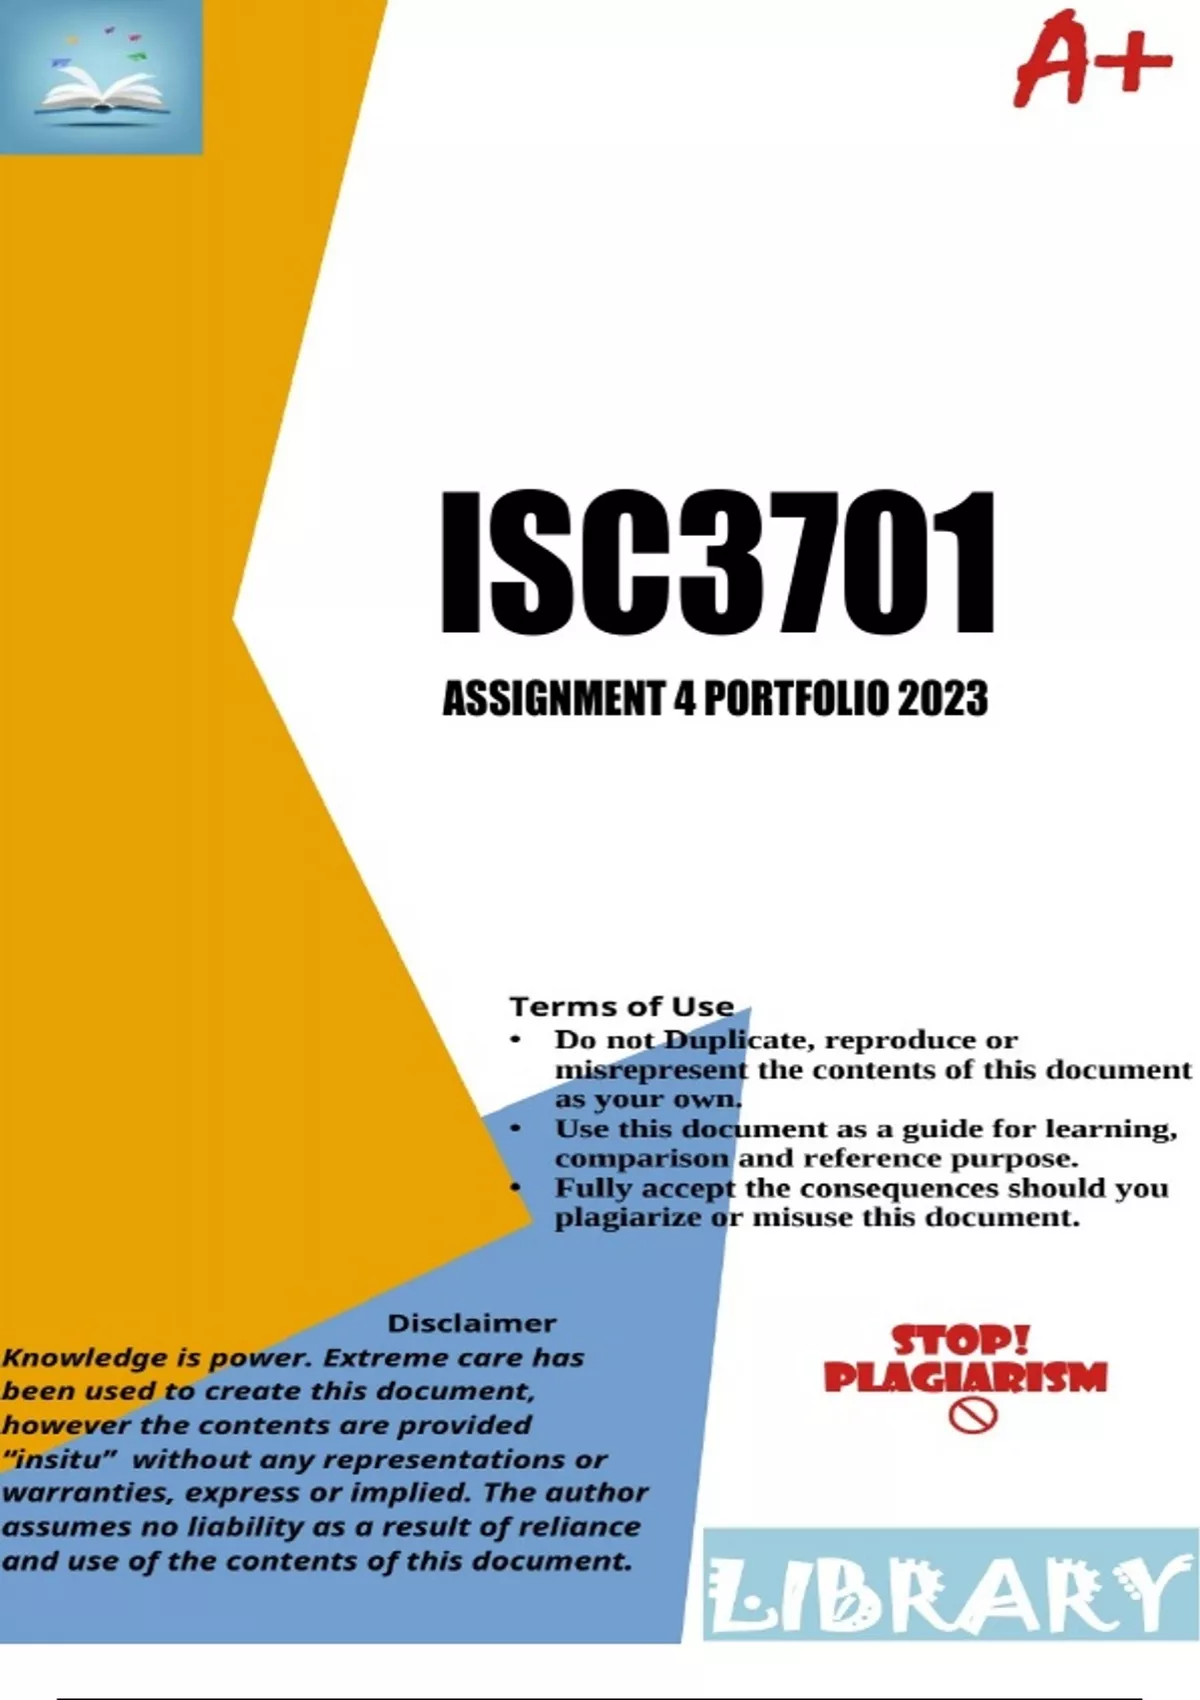 isc3701 assignment 4 answers